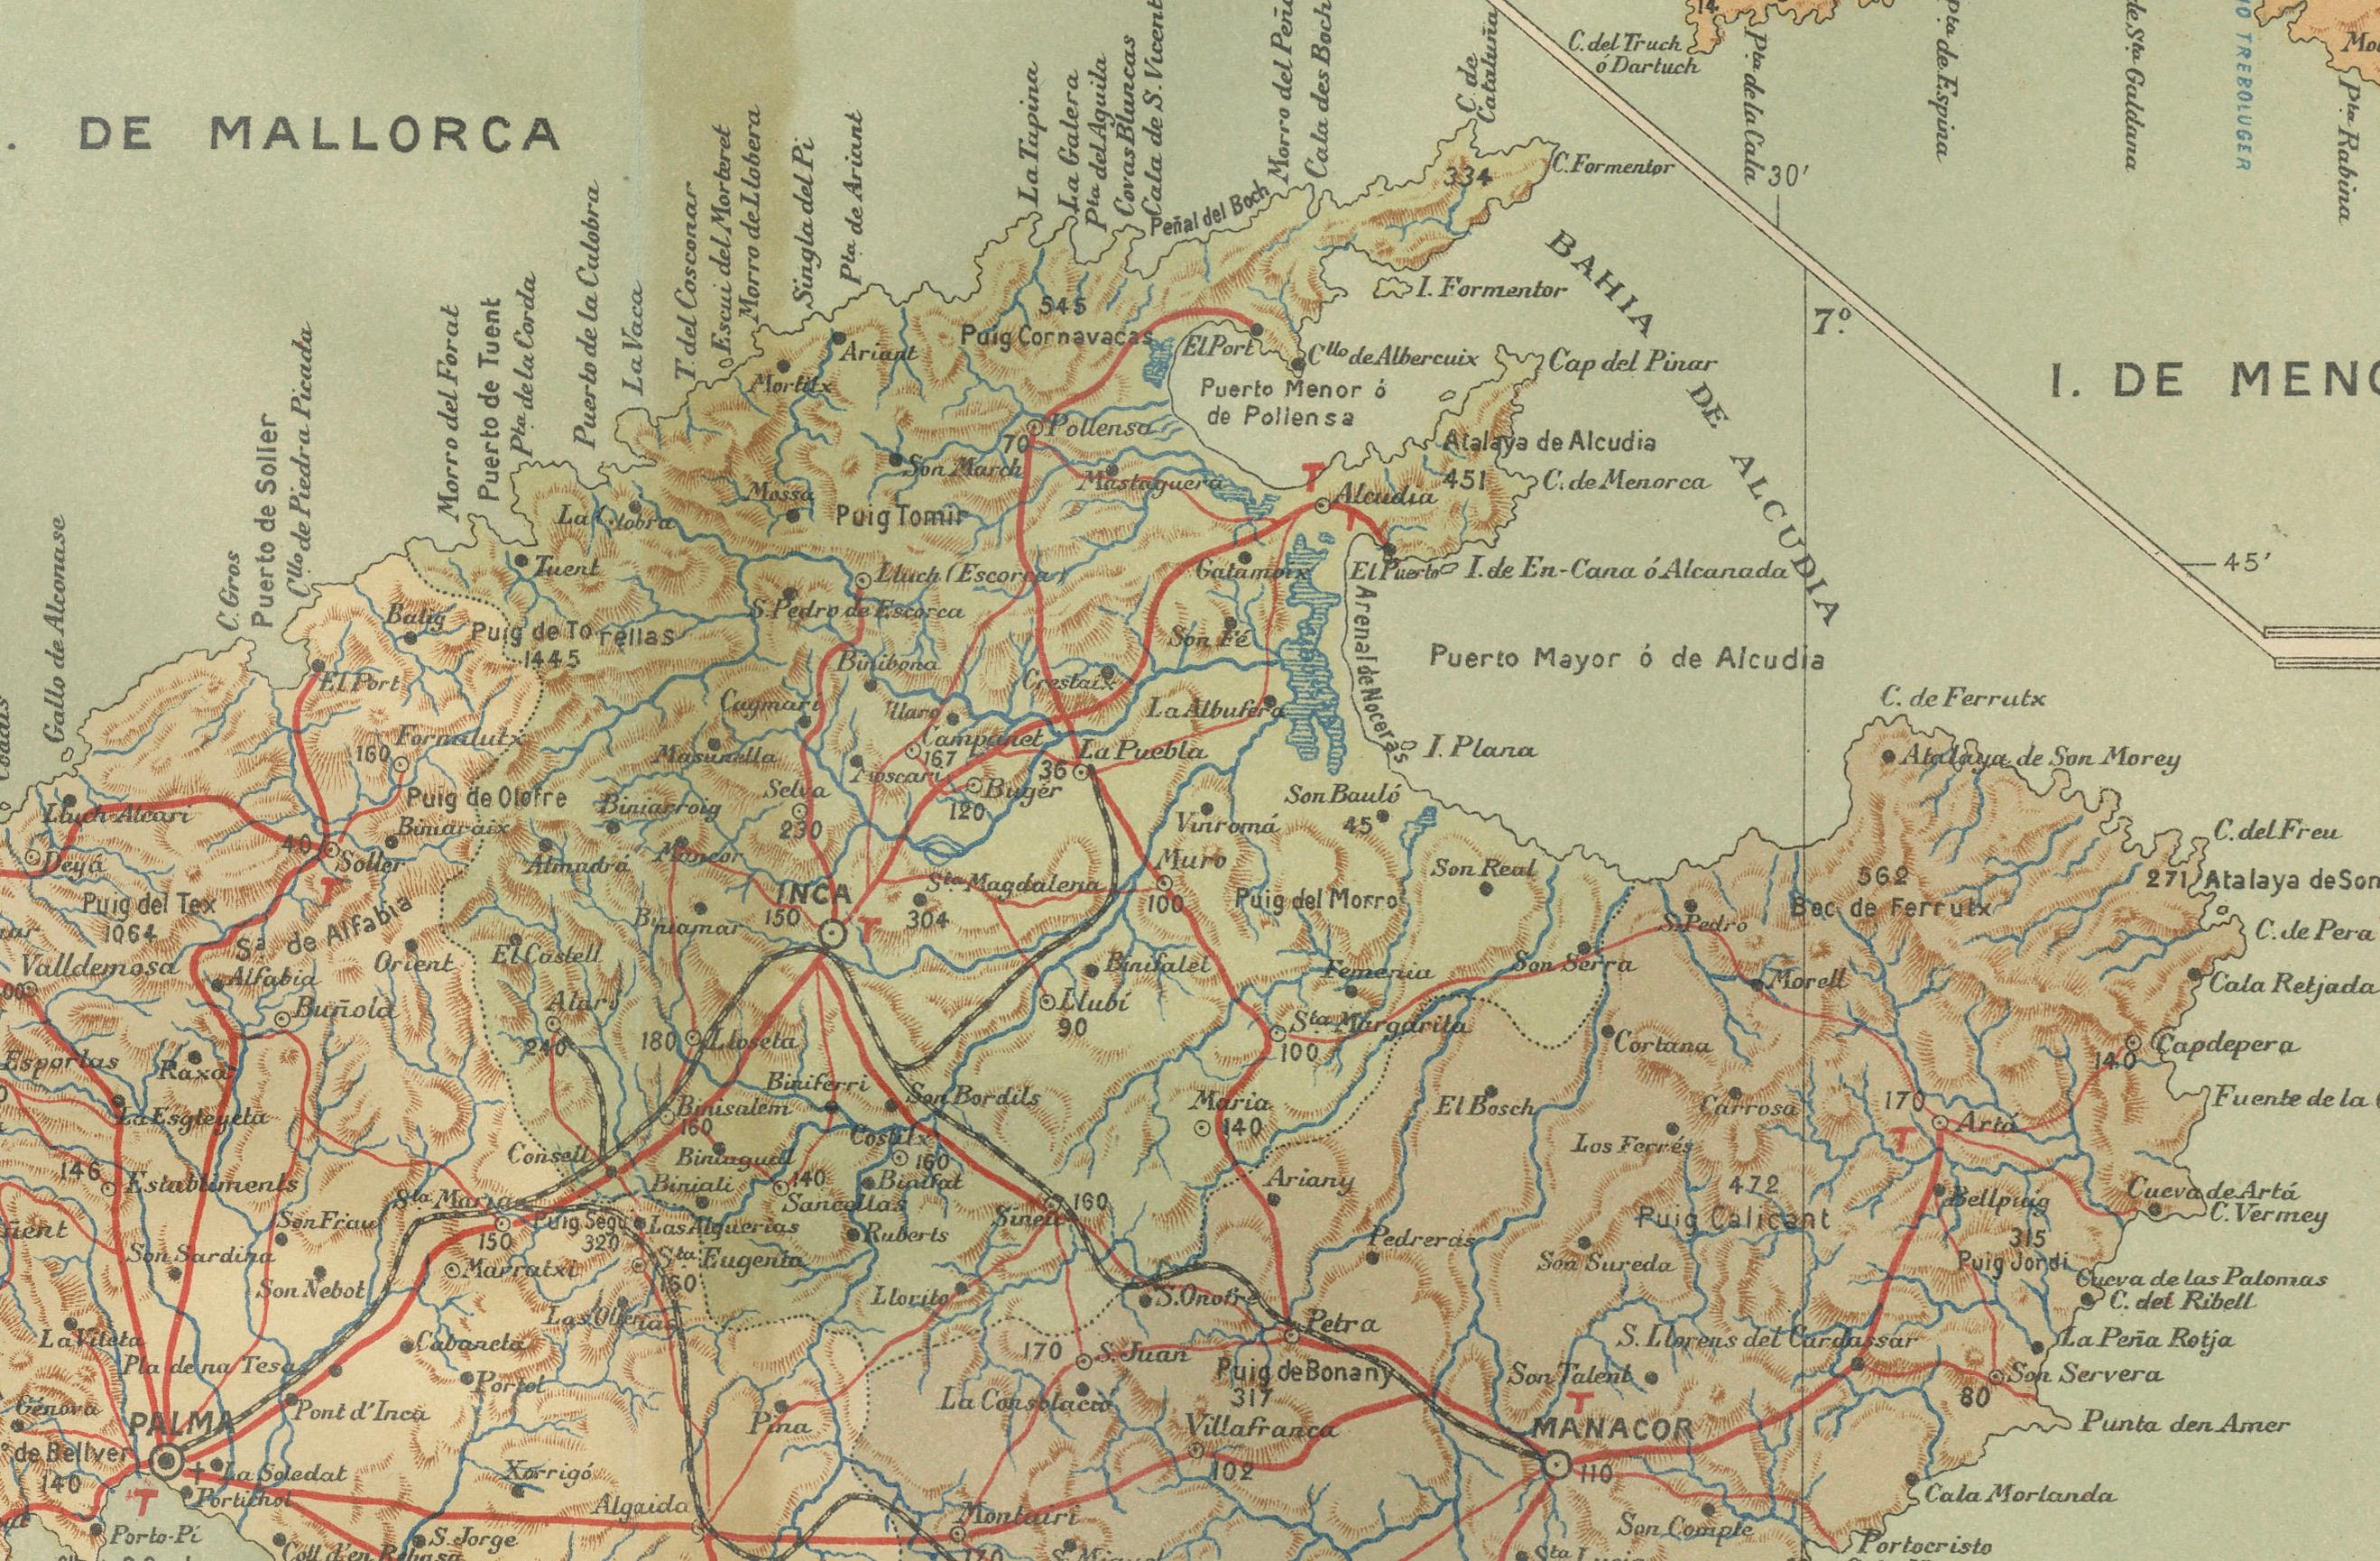 The Balearic Islands, Spain, from the year 1902. The title on the map is 